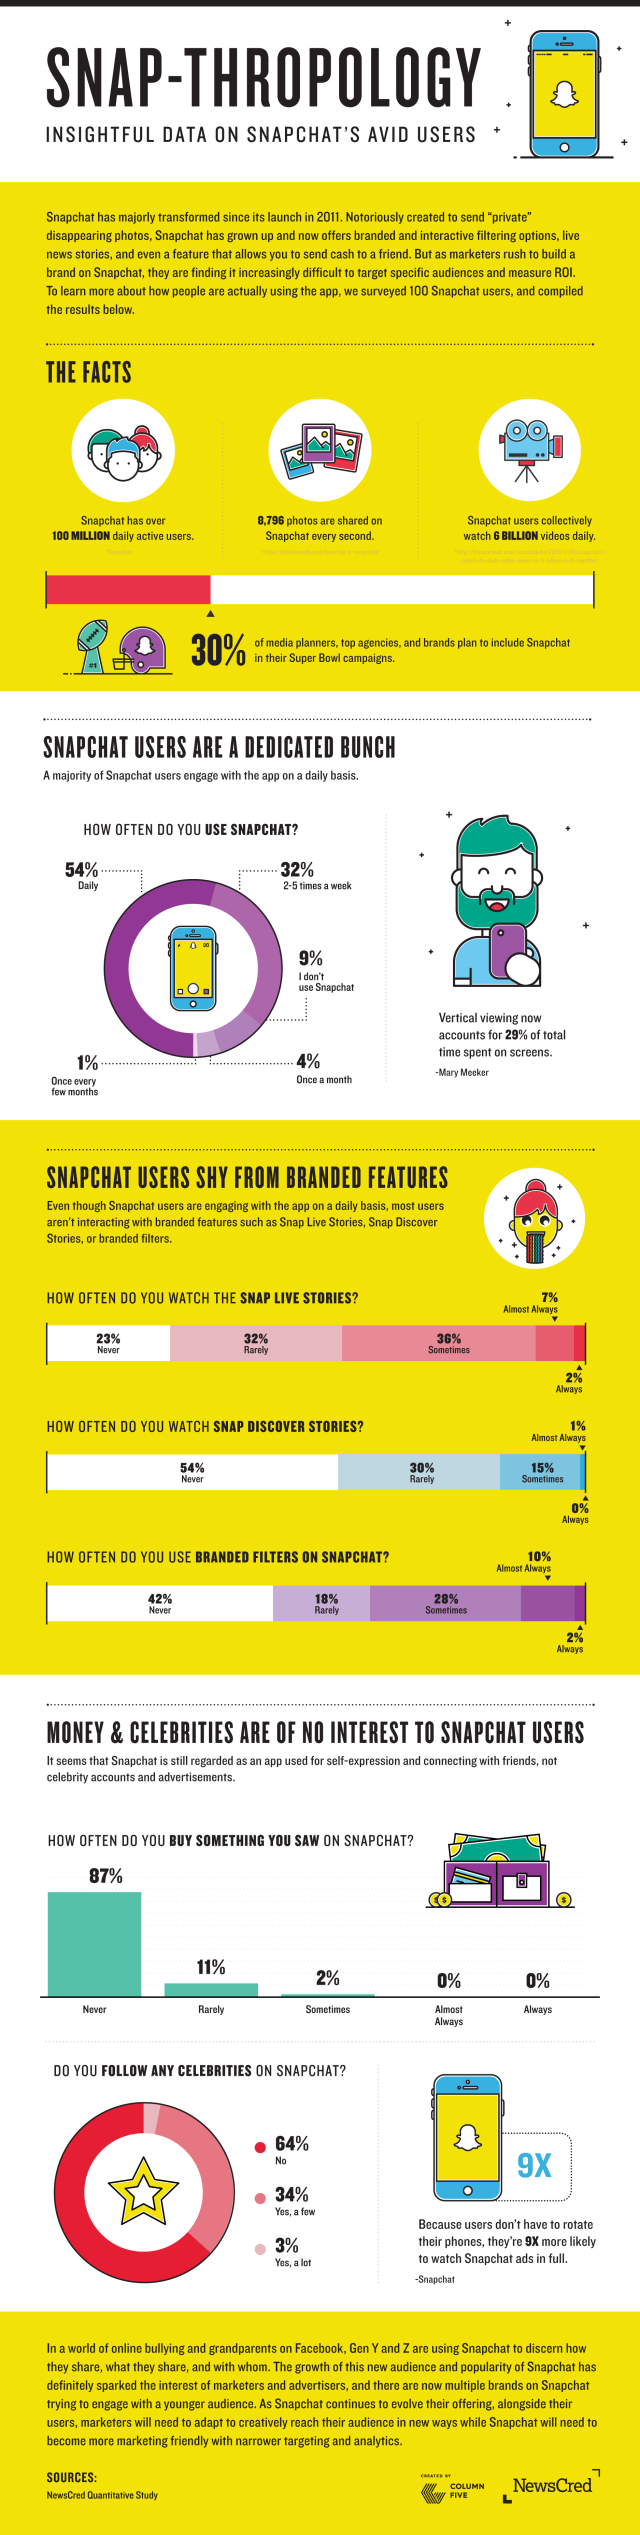 how-people-use-snapchat-infographic.png